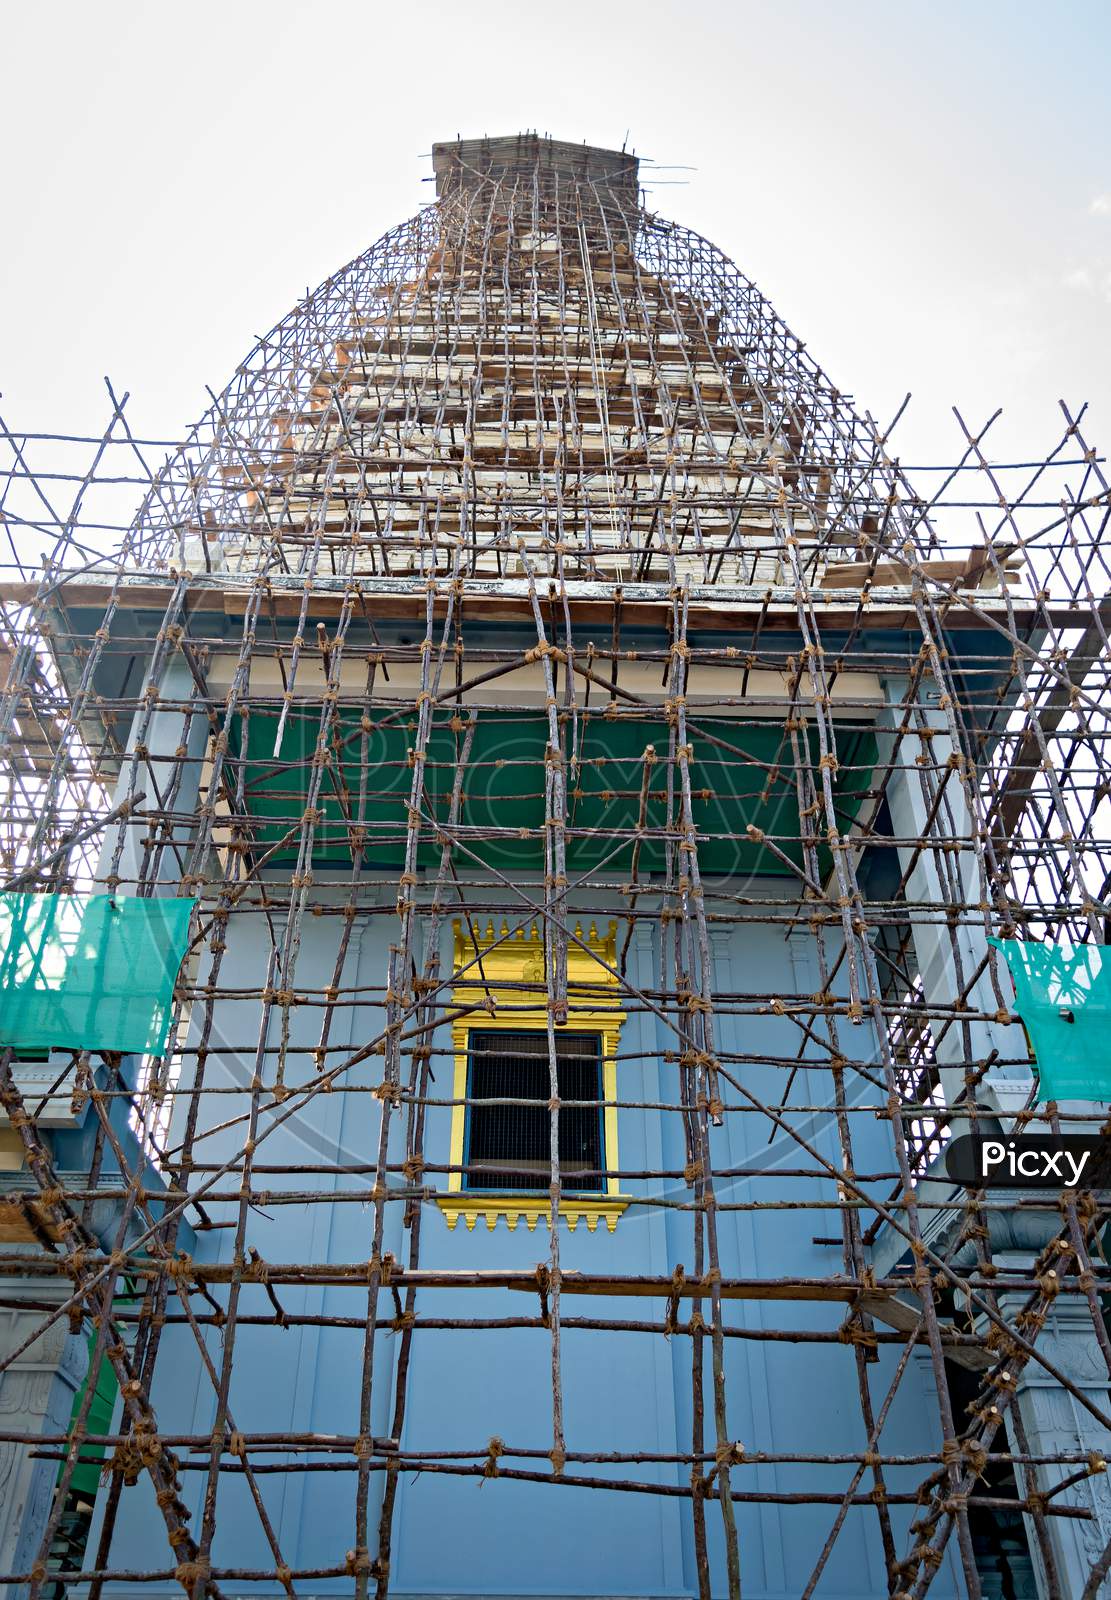 South Indian Temple Covered With Bamboo Cage Erected For Painting Work.